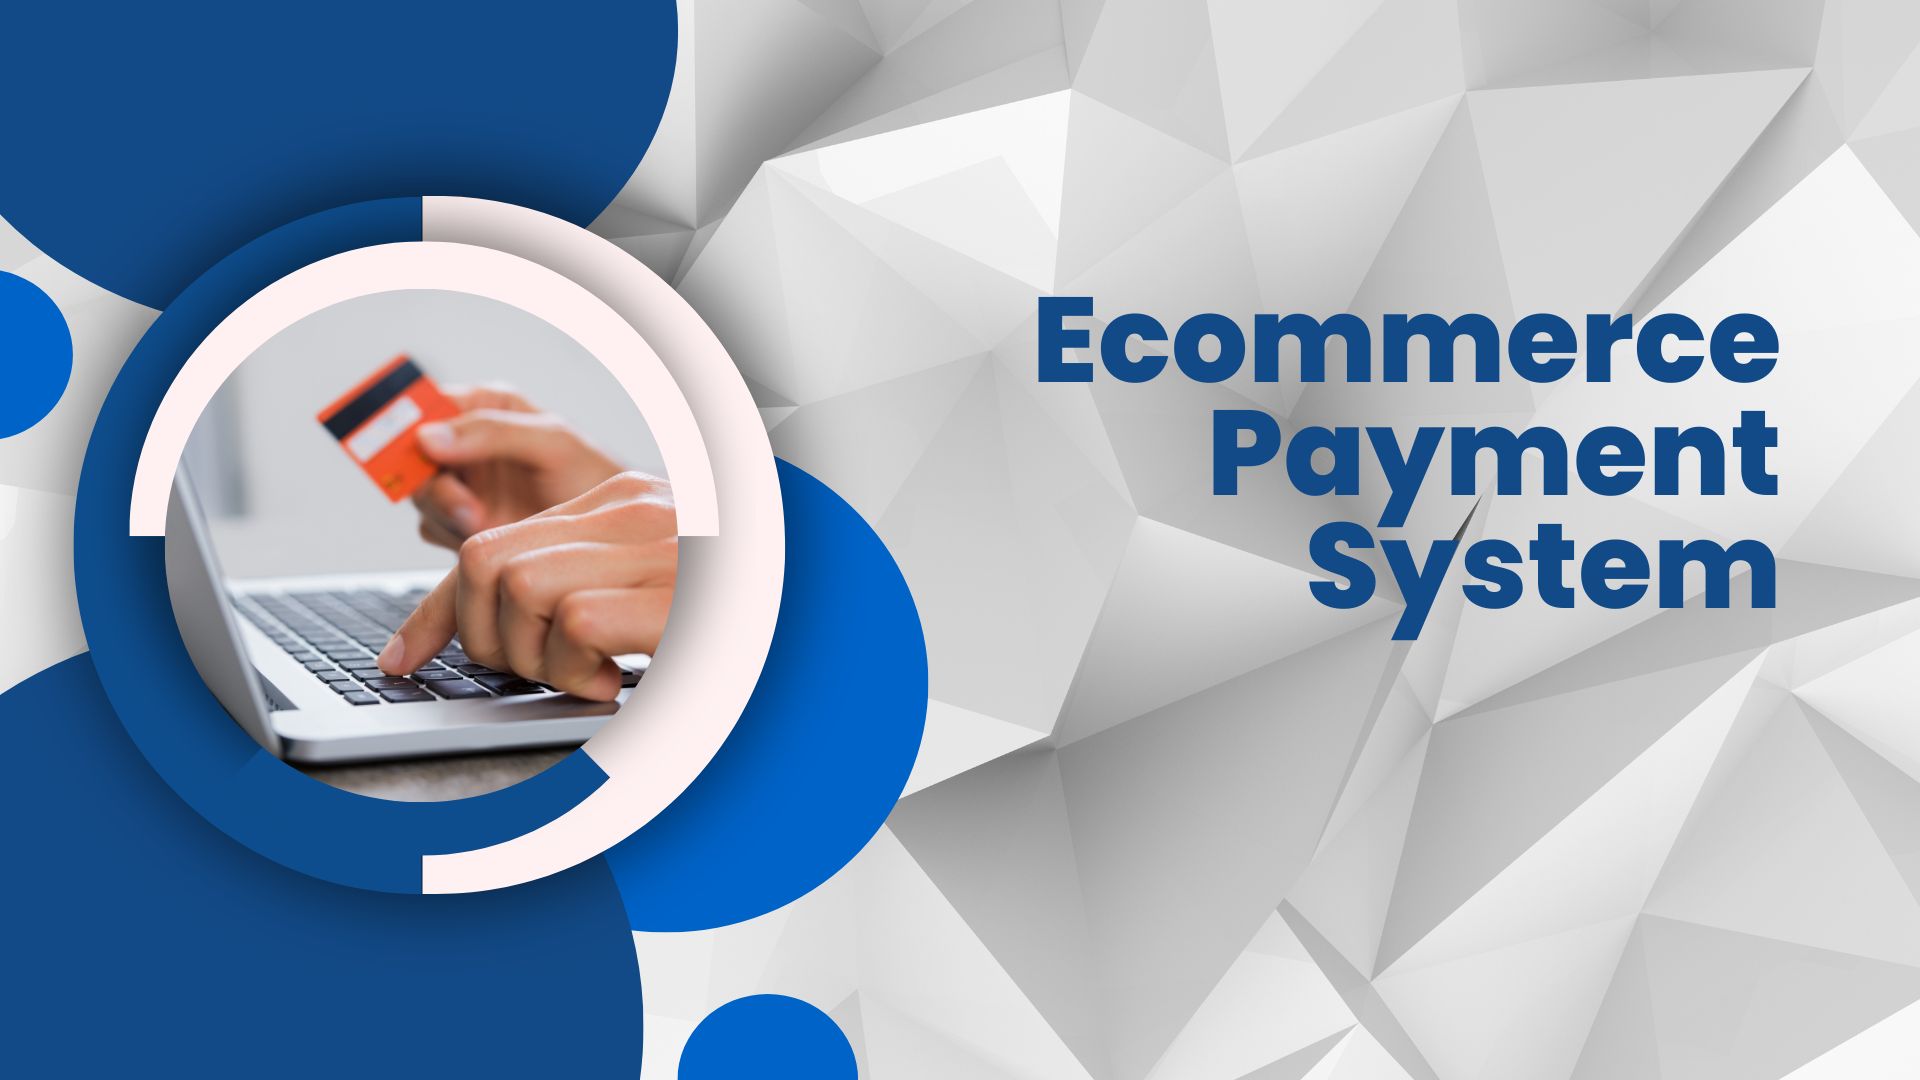 Ecommerce Payment System